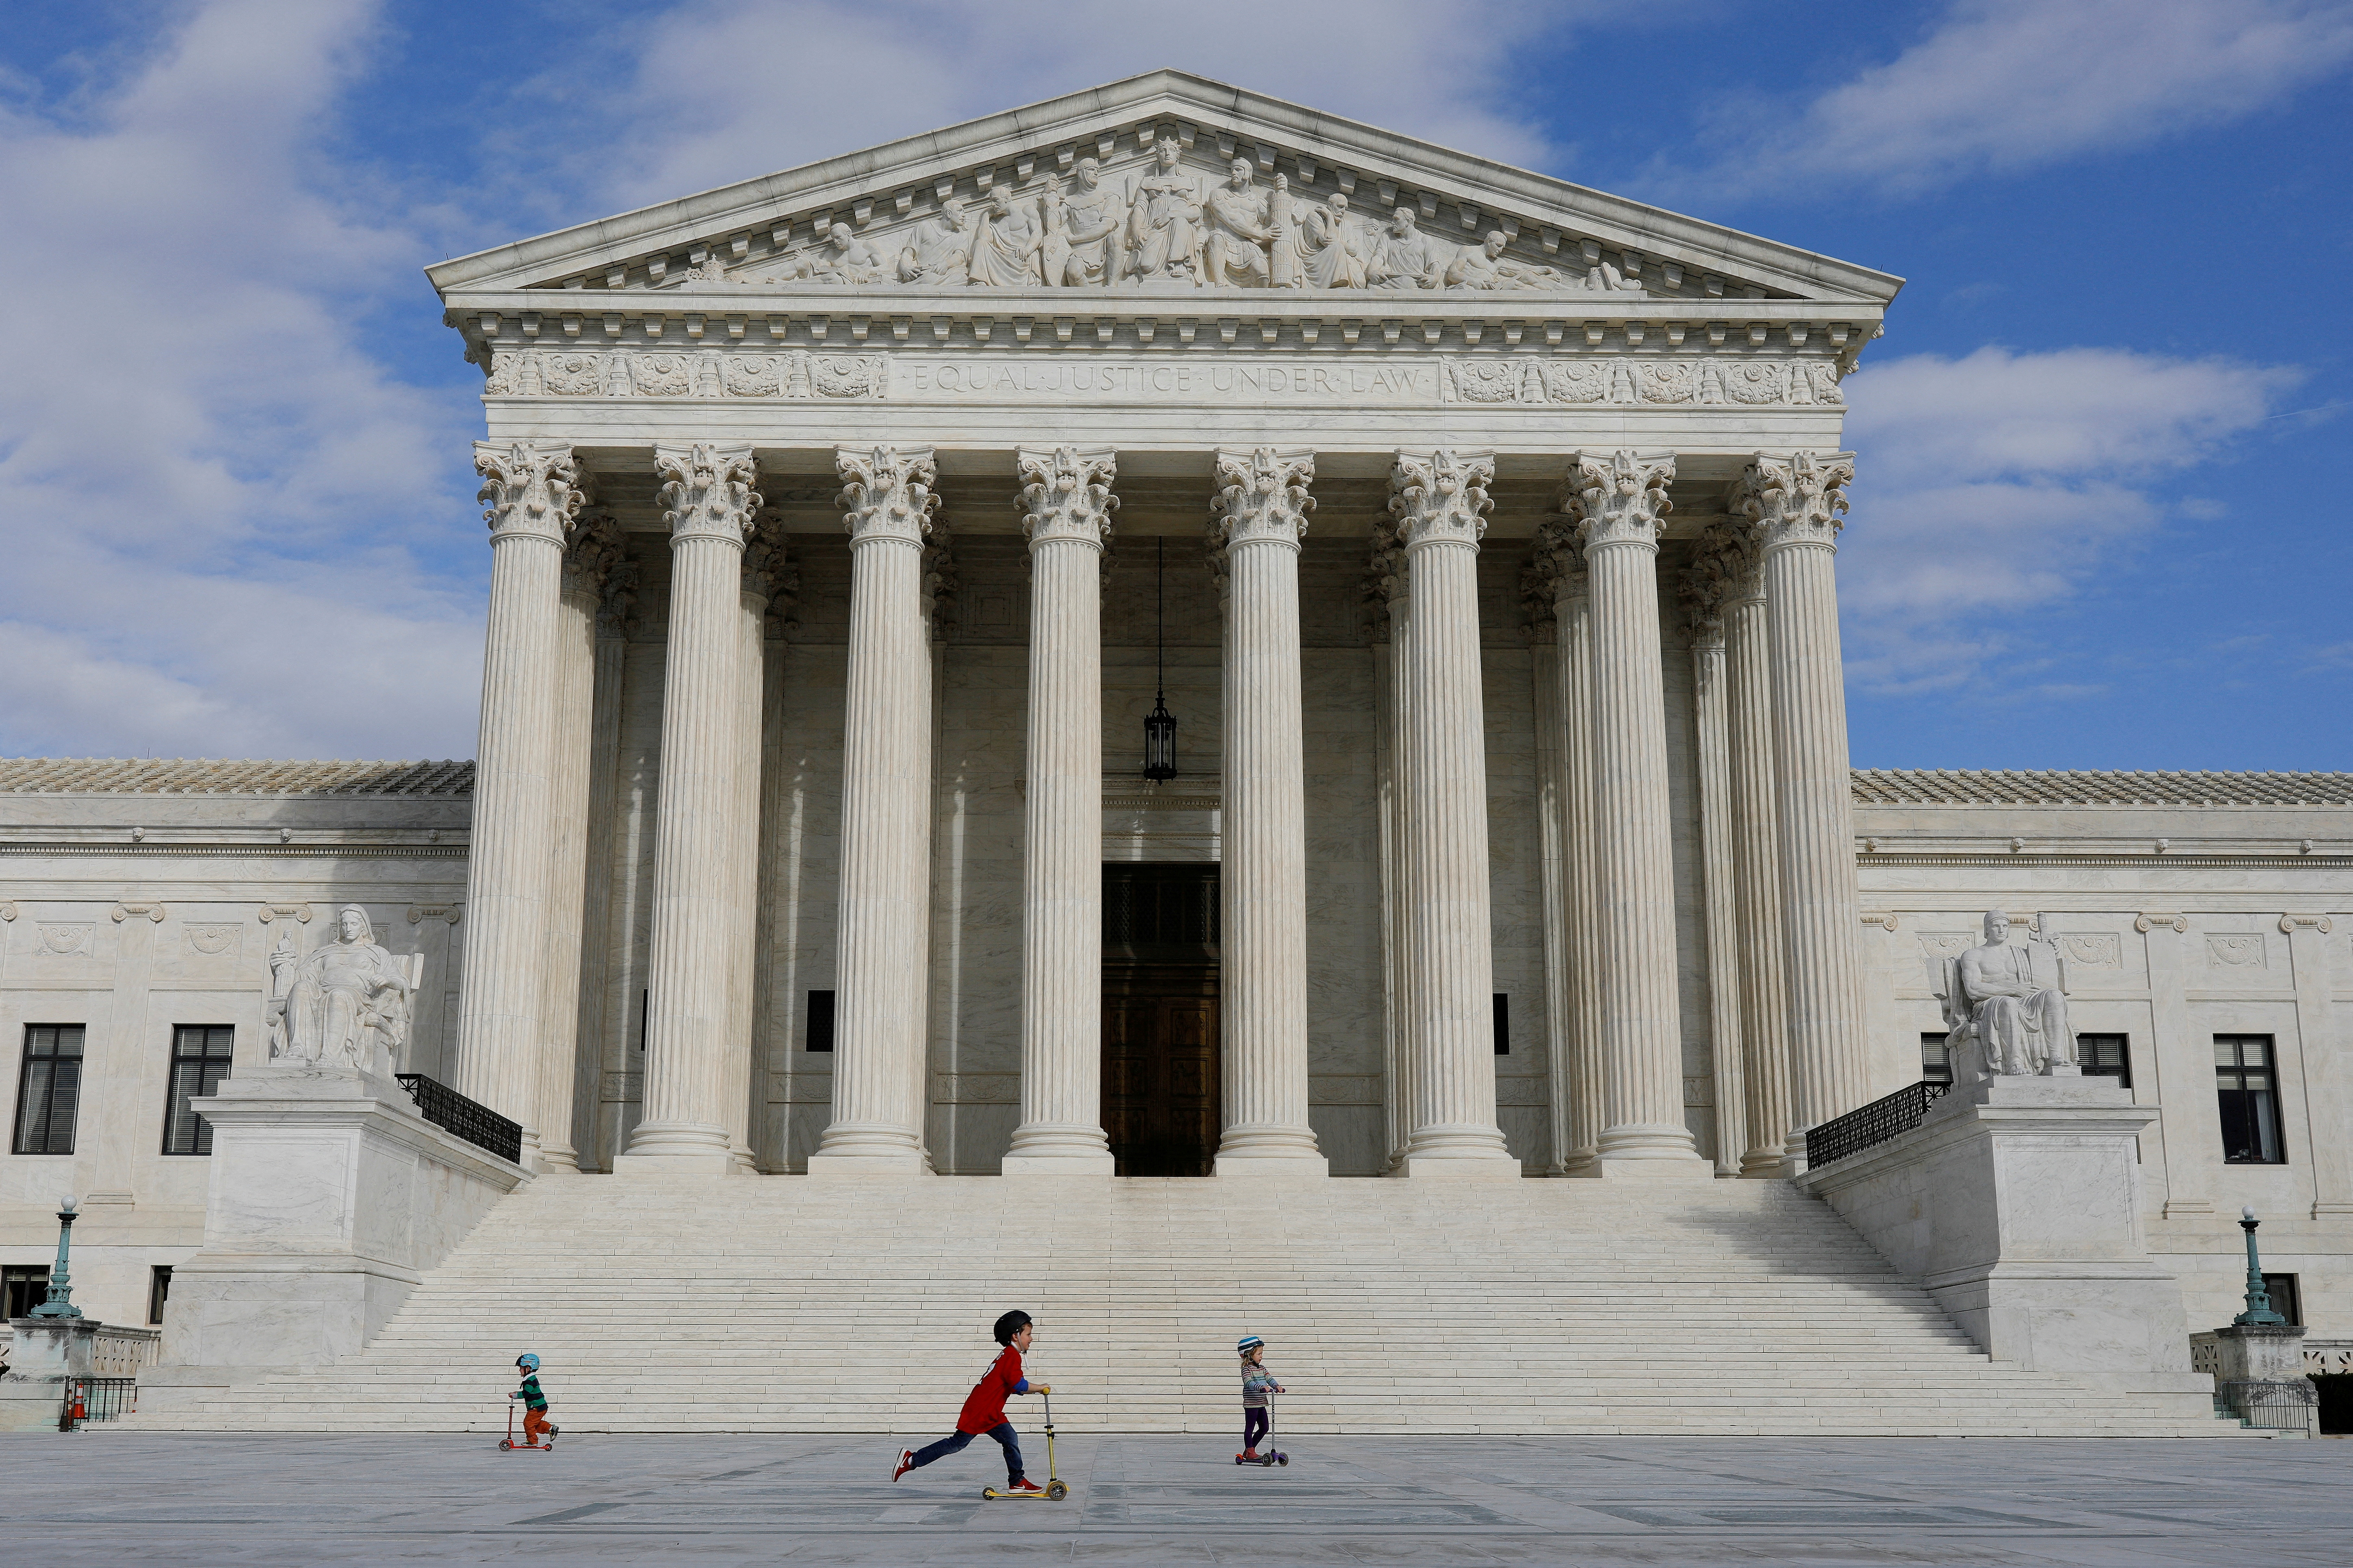 Children ride scooters across the plaza at the United States Supreme Court, following the government's notice to halt all building tours due to the (COVID-19) coronavirus, on Capitol Hill in Washington